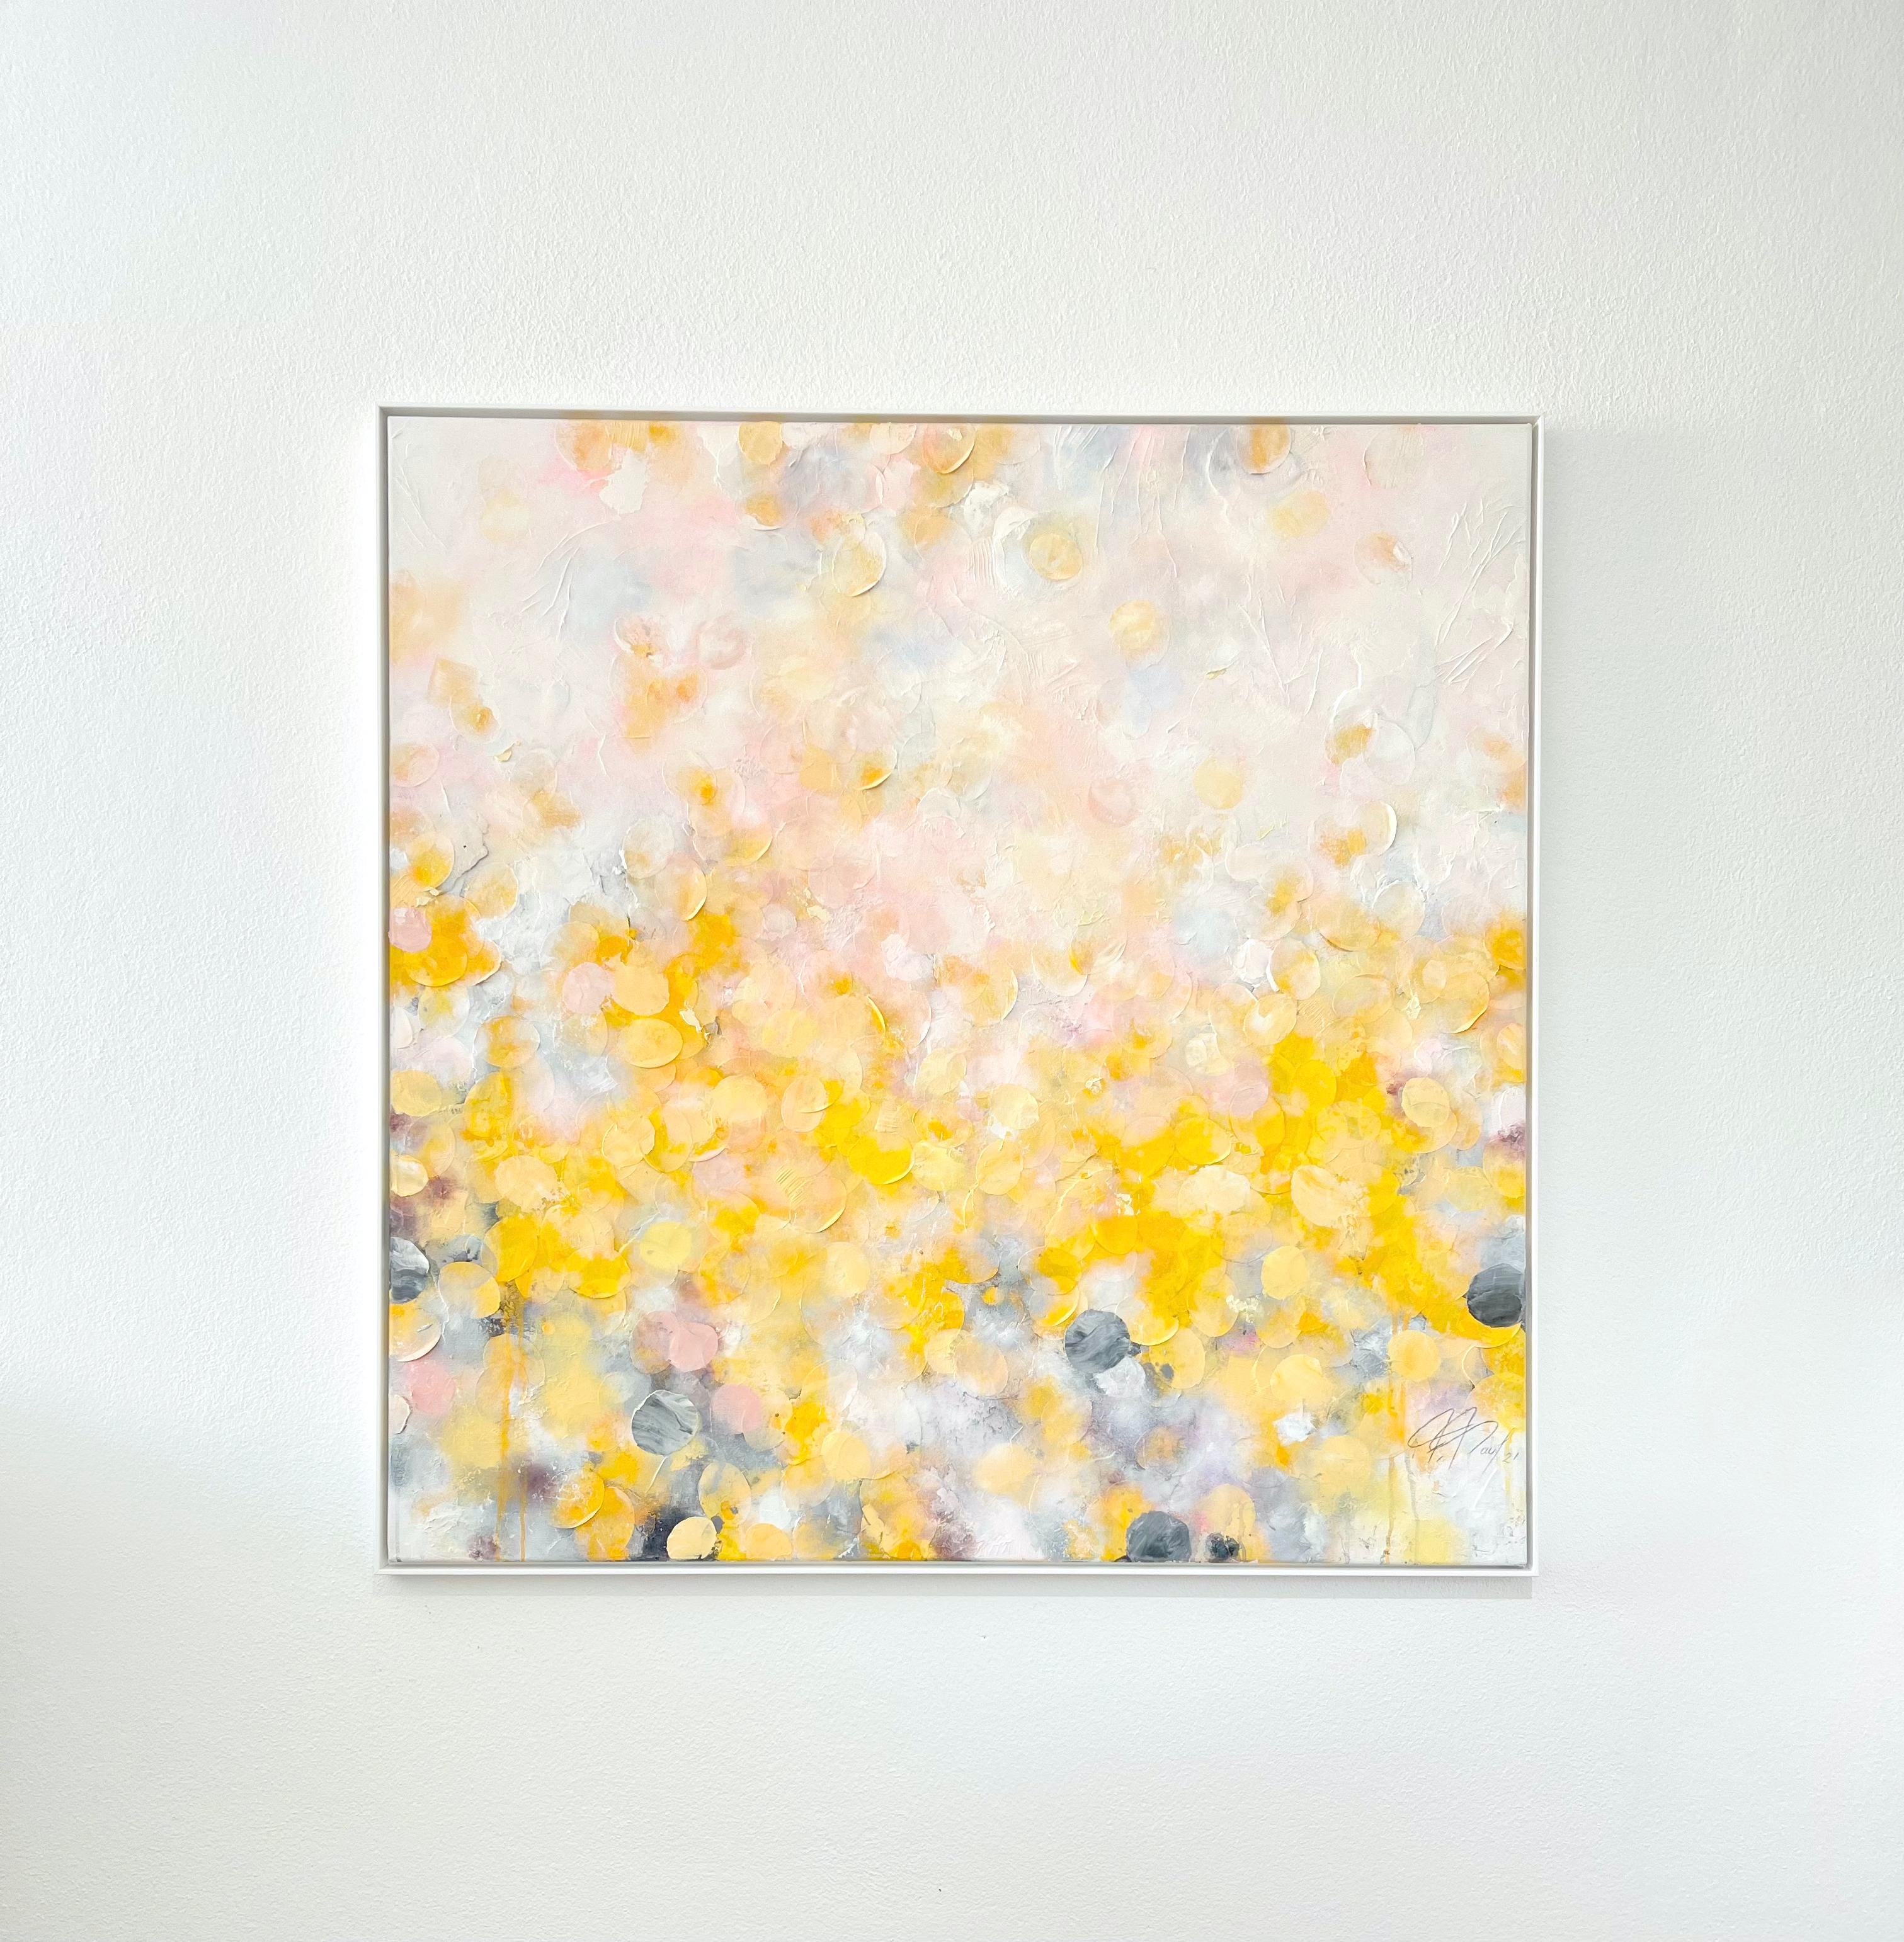 Longing for Sun II - abstract art, contemporary art, modern, yellow, rose, Natur - Painting by Frederic Paul